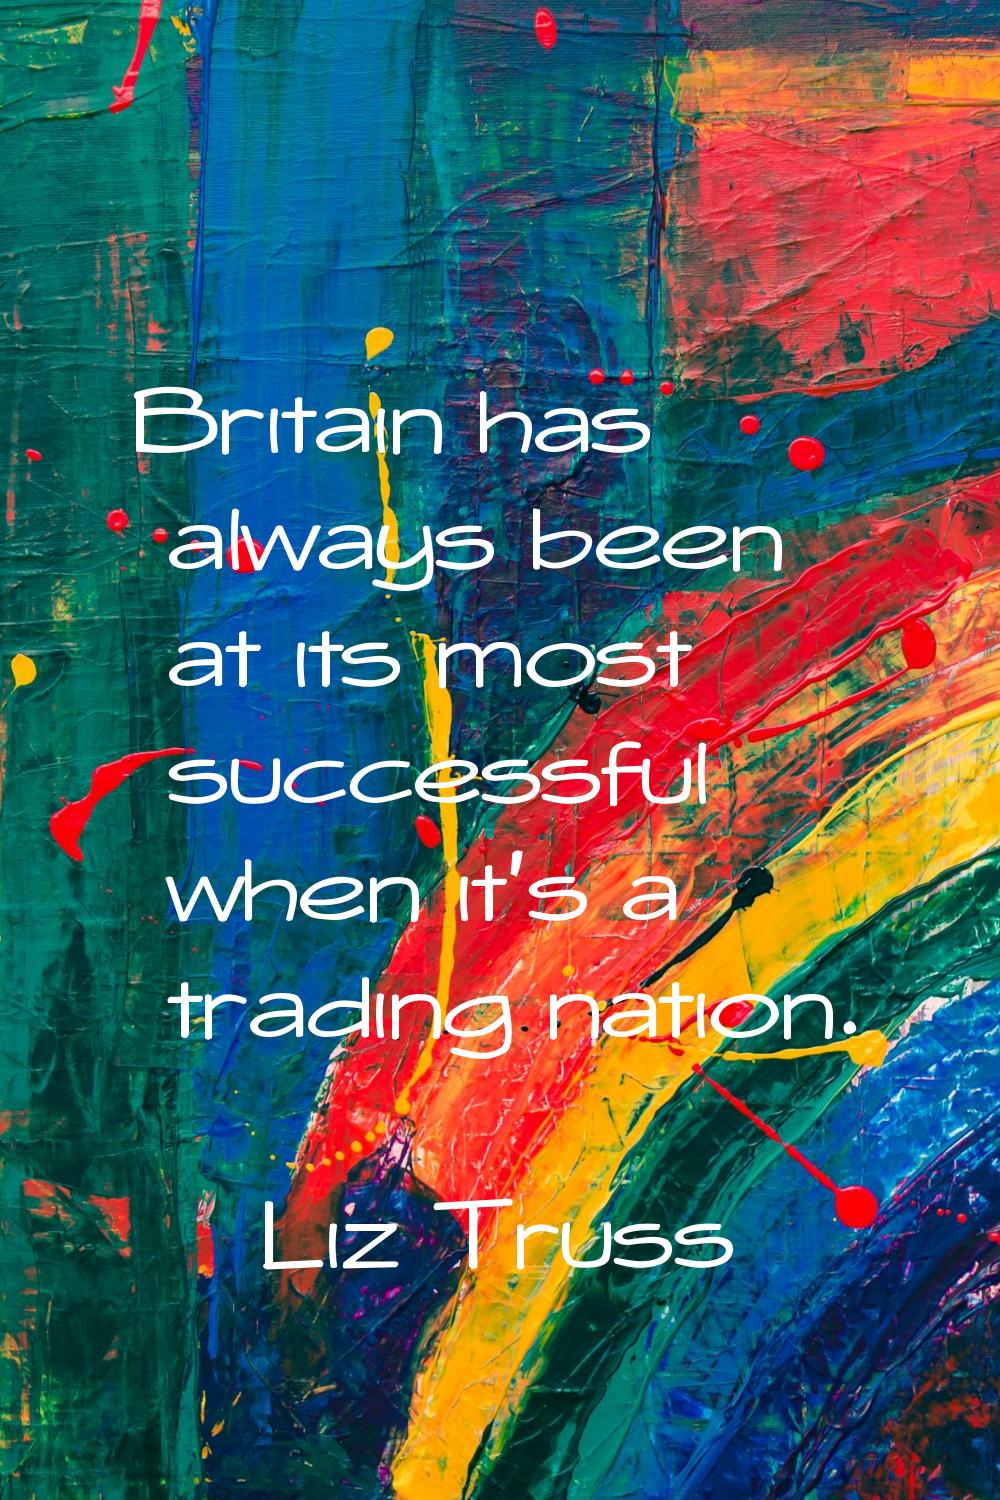 Britain has always been at its most successful when it's a trading nation.